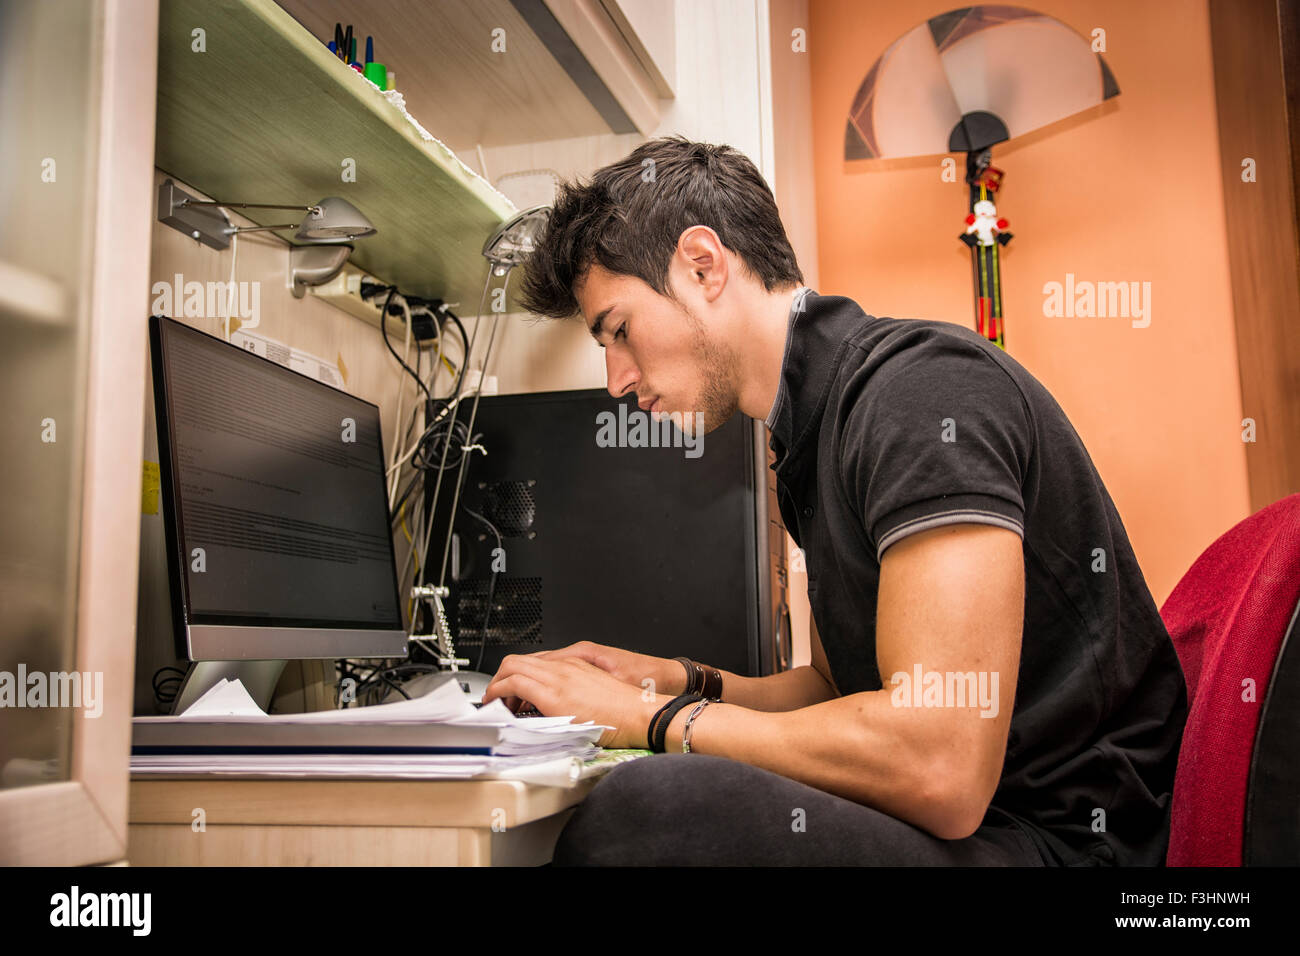 Waist Up Profile of Young Attractive Man with Dark Hair, Sitting at Computer Desk Working on Paper Homework or on His Start-up B Stock Photo